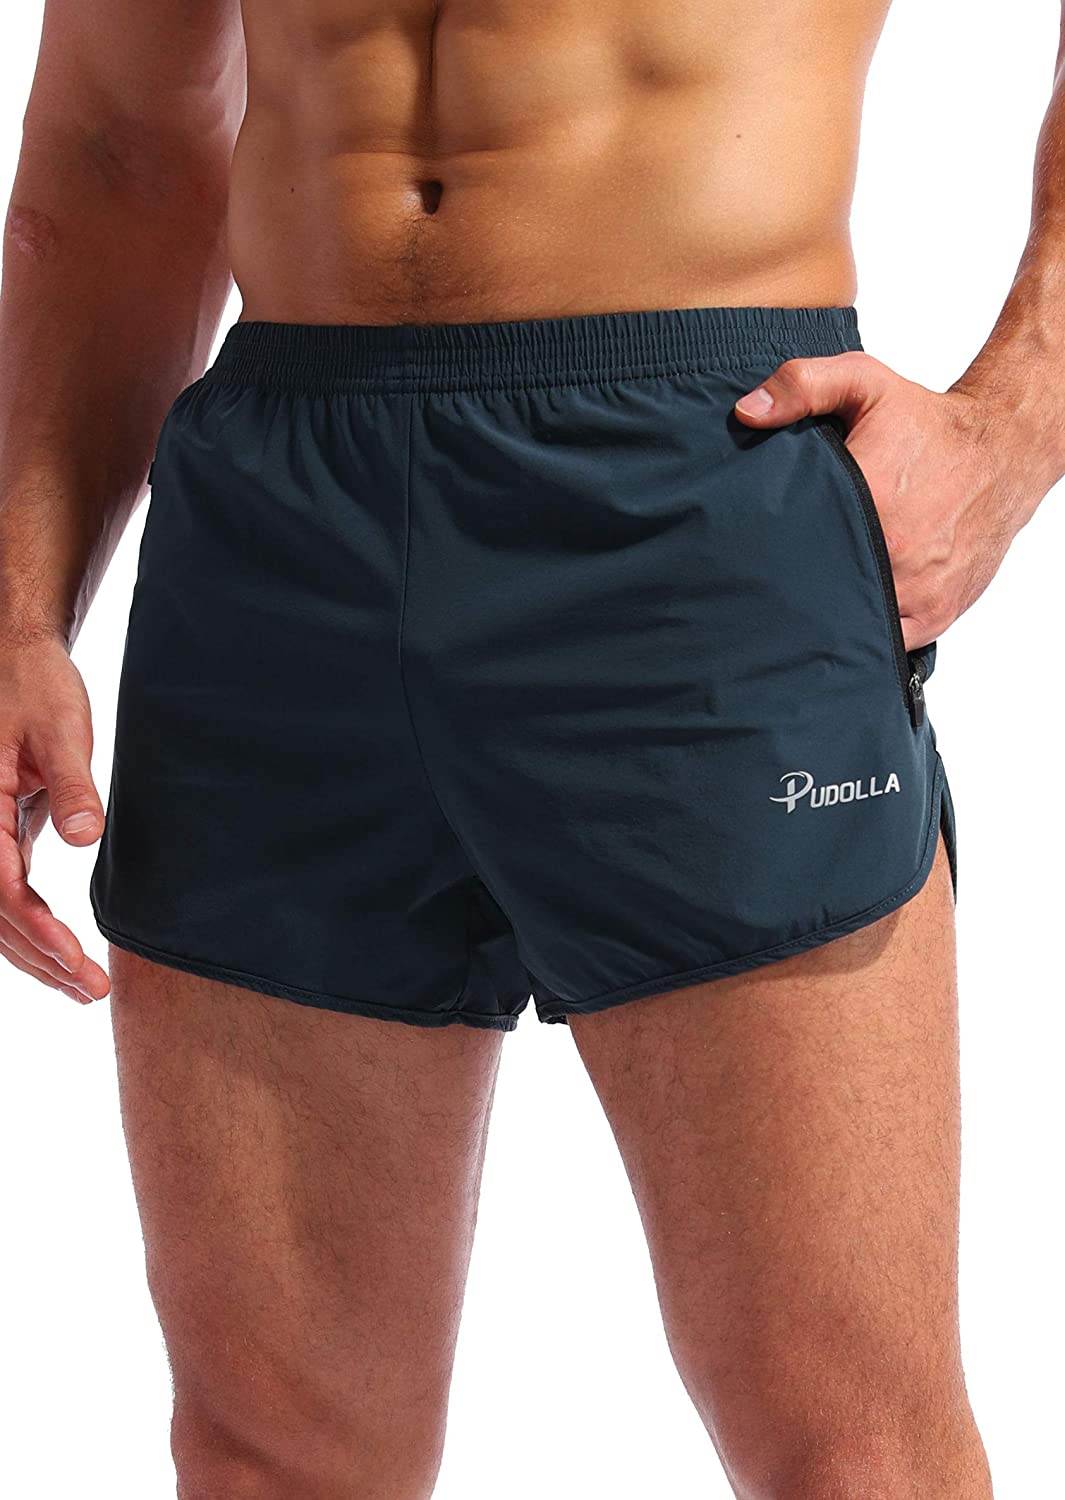 Pudolla Men S Running Shorts 3 Inch Quick Dry Gym Athletic Workout Shorts For Me Ebay